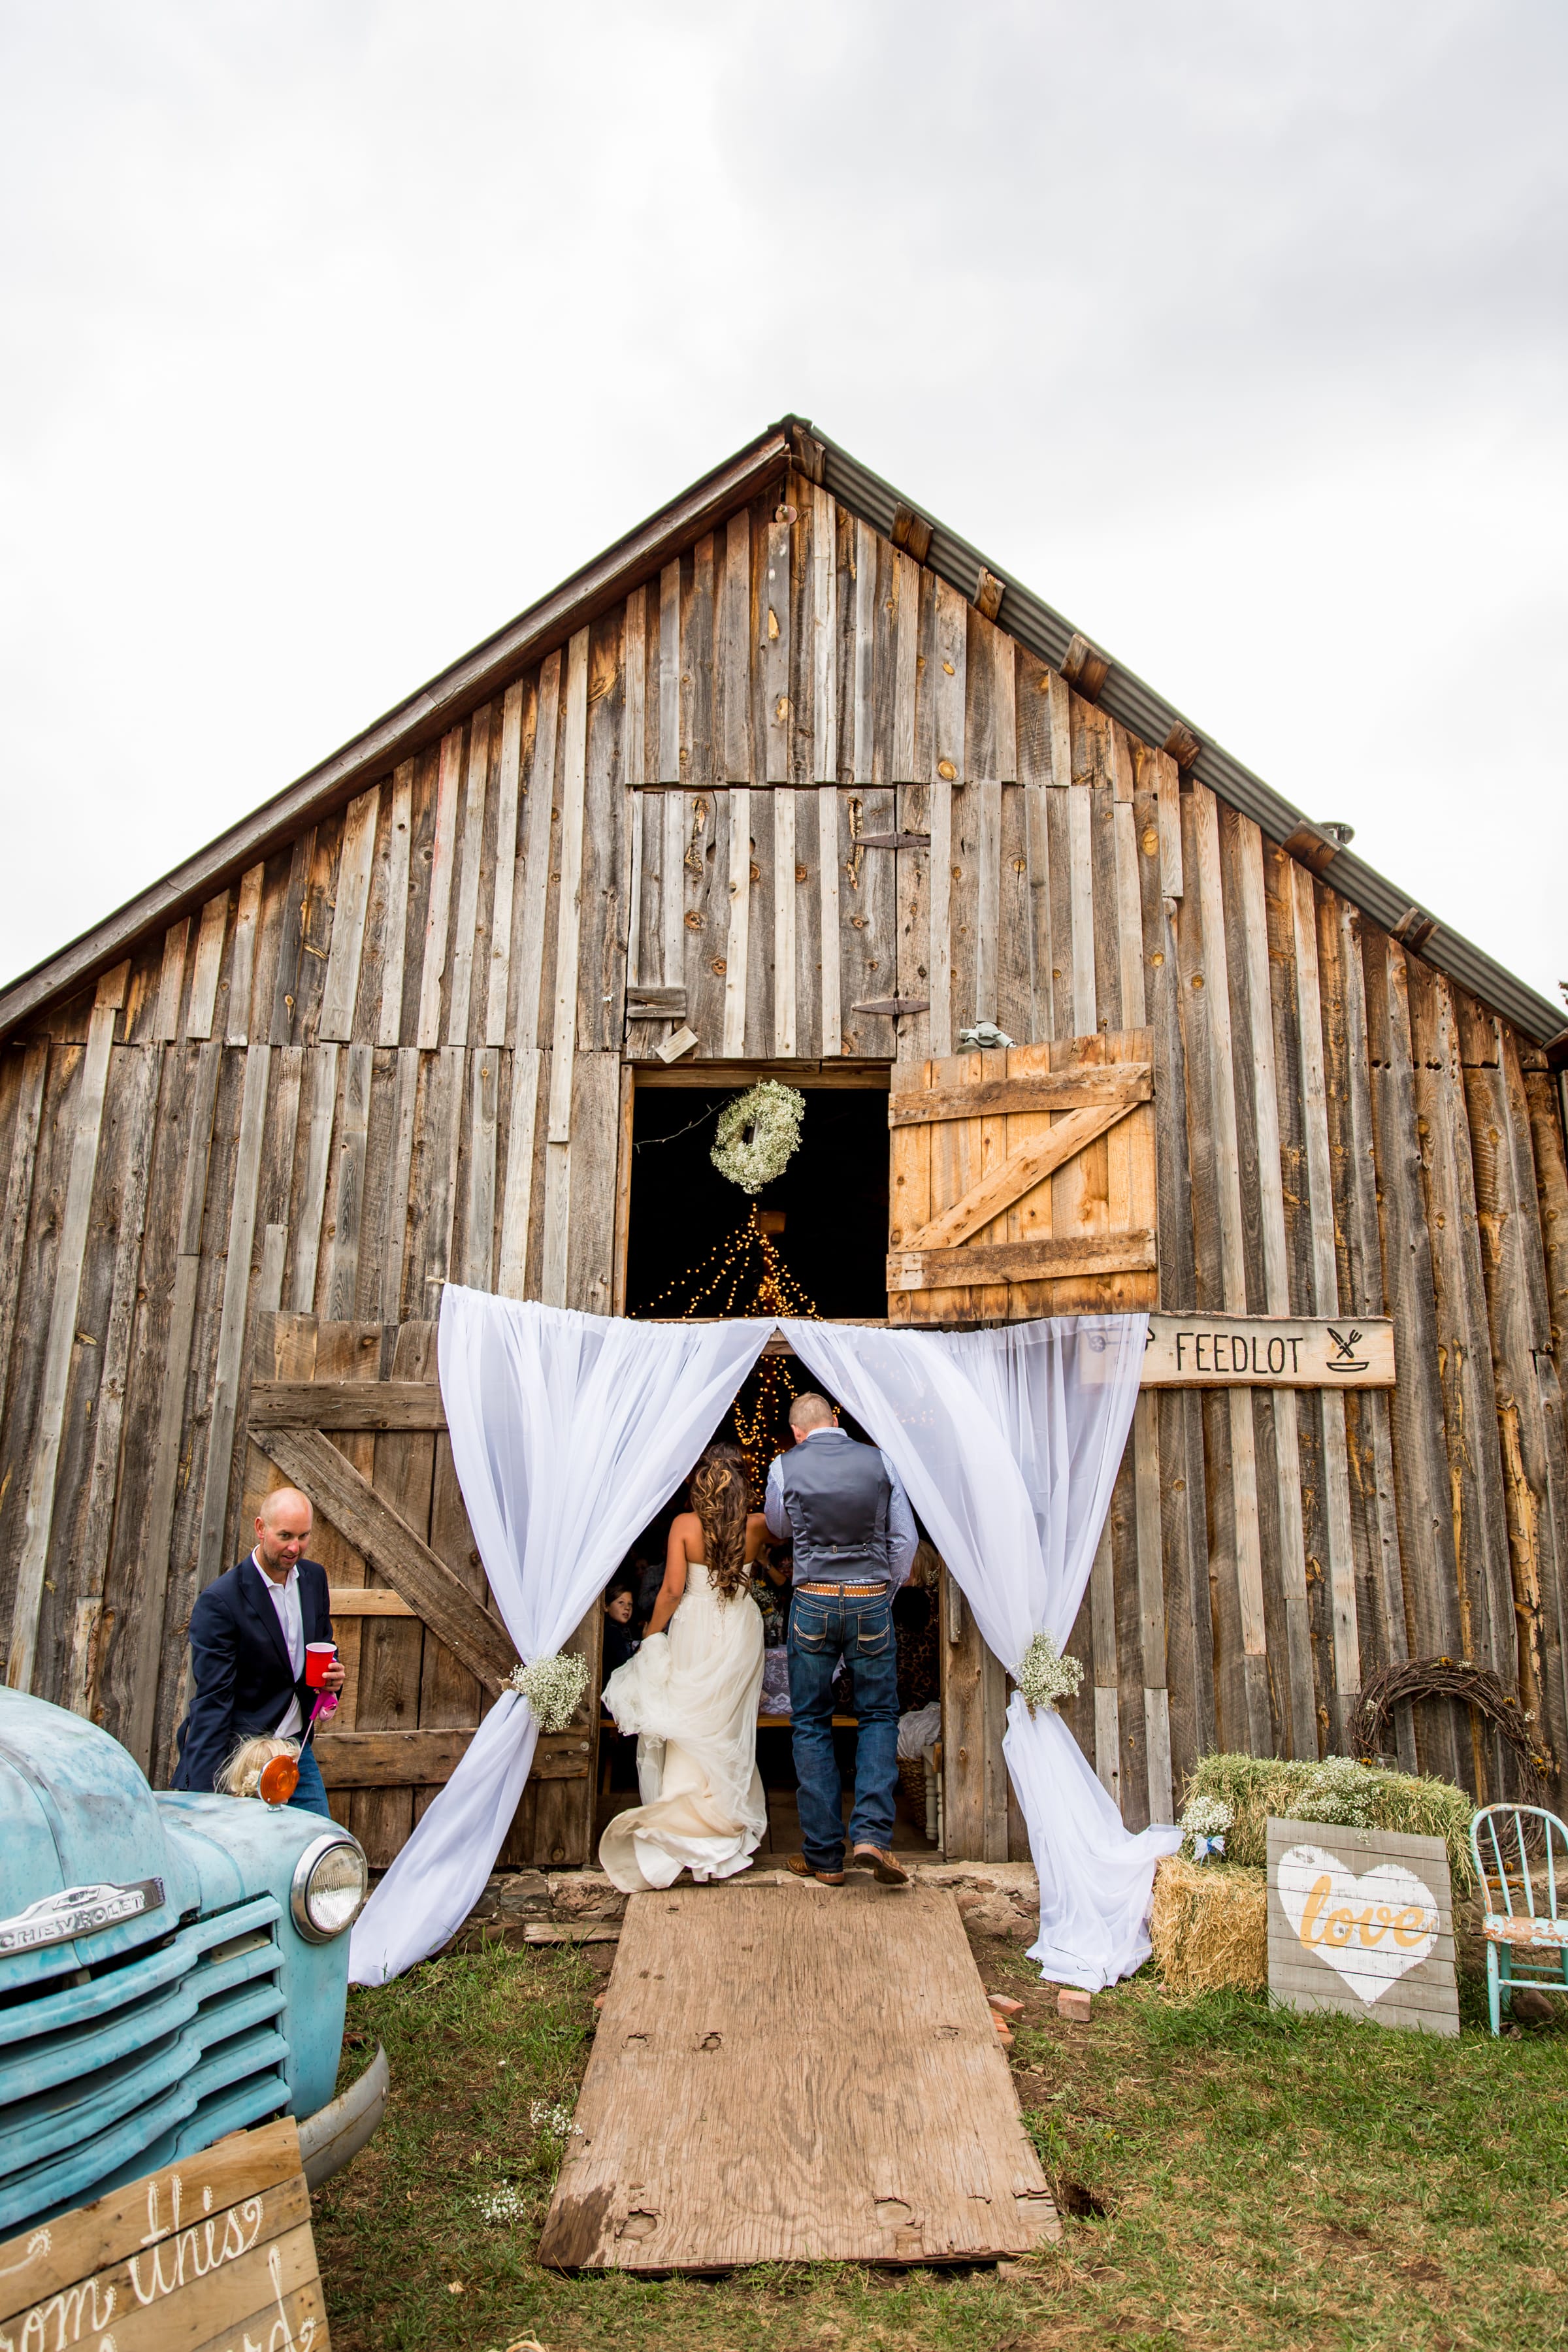 Rustic Wedding At A Repurposed Barn - Maggie Bride Brooke wearing Patience by Maggie Sottero